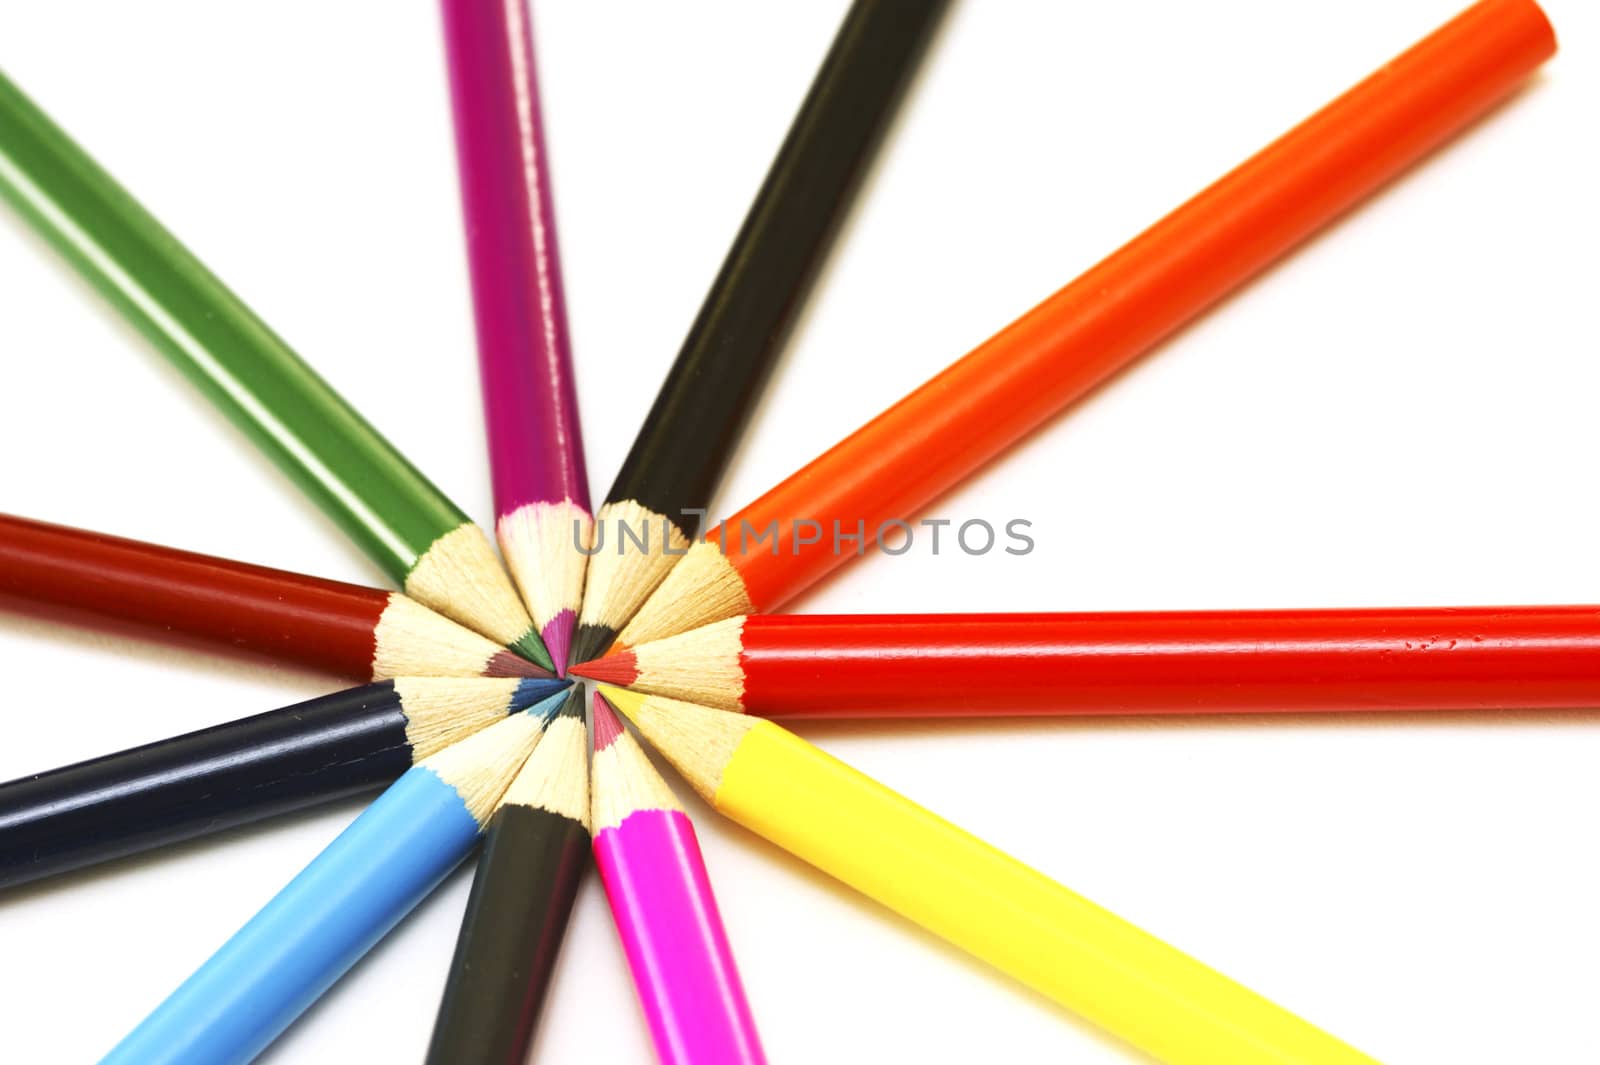 pencils in many colors on a white background